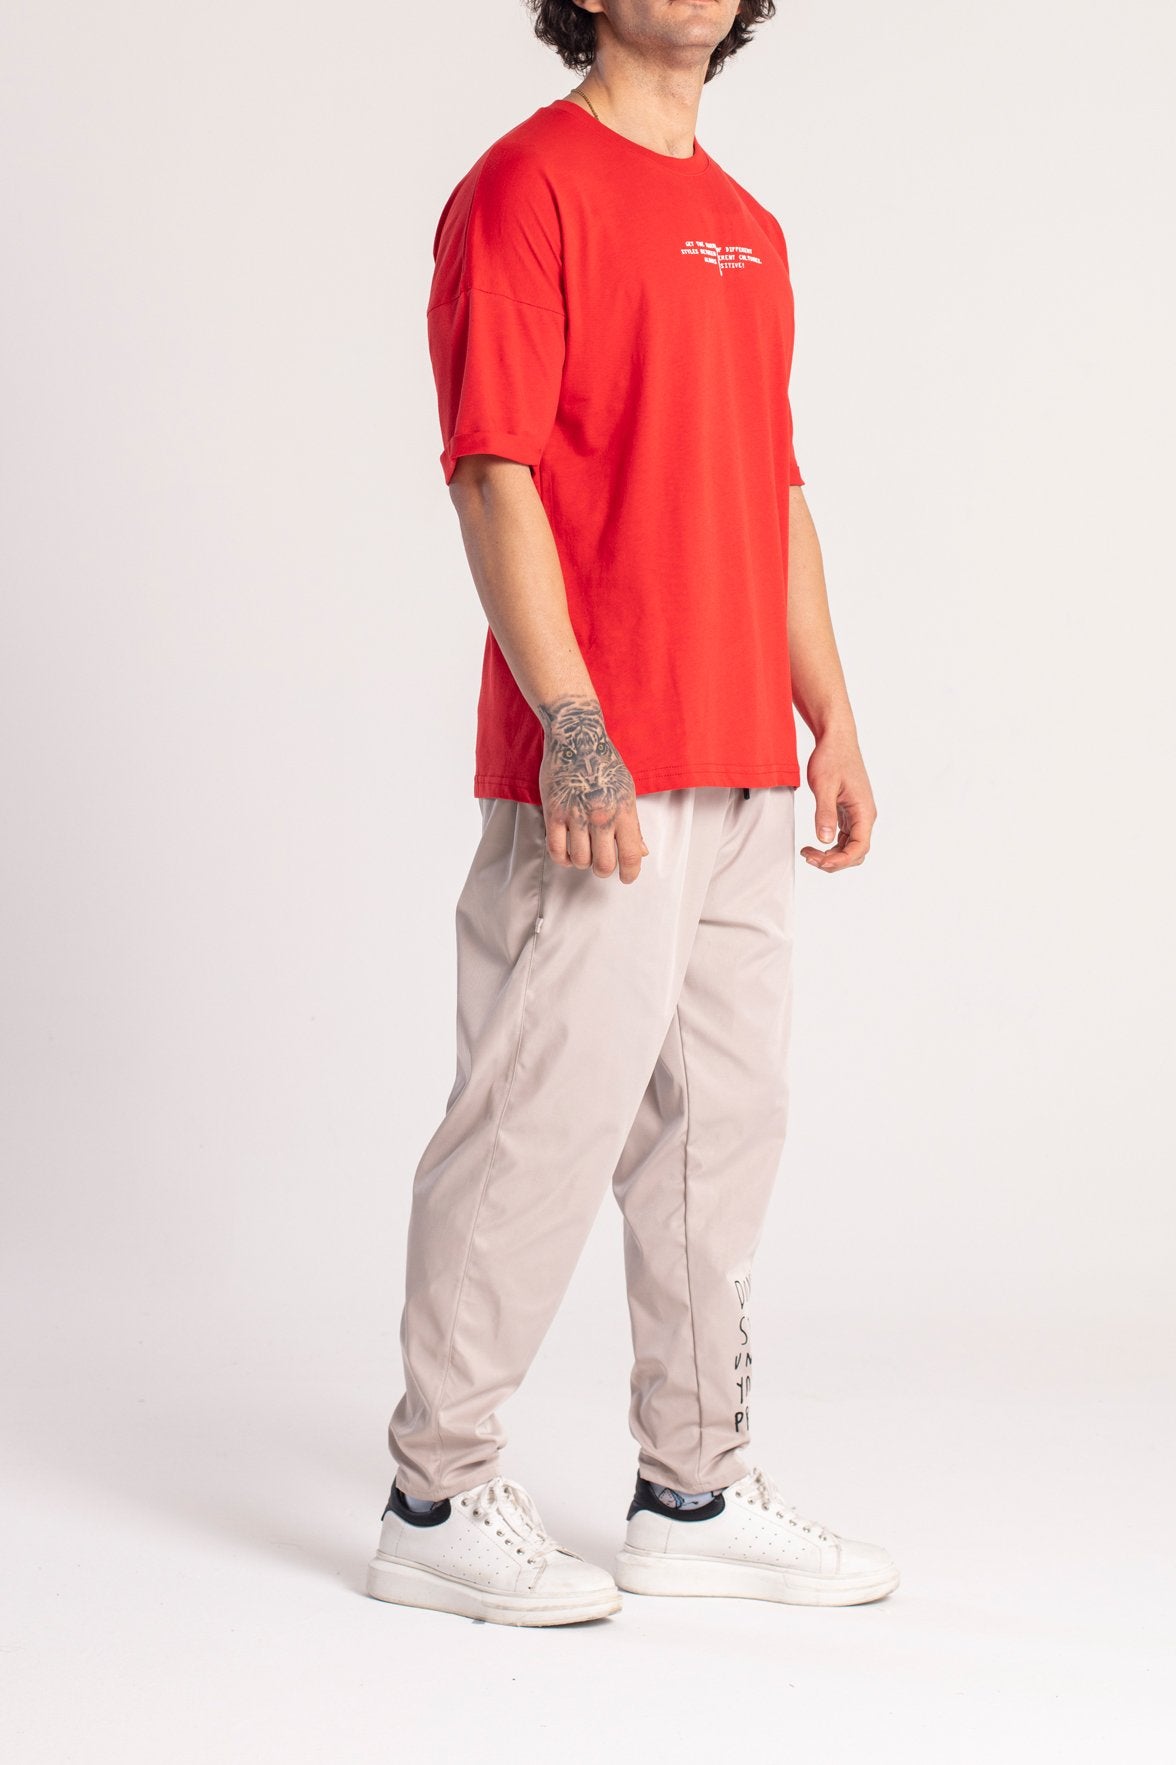 T-SHIRT OVERSIZE GET THE HARMONY - COLORE ROSSO